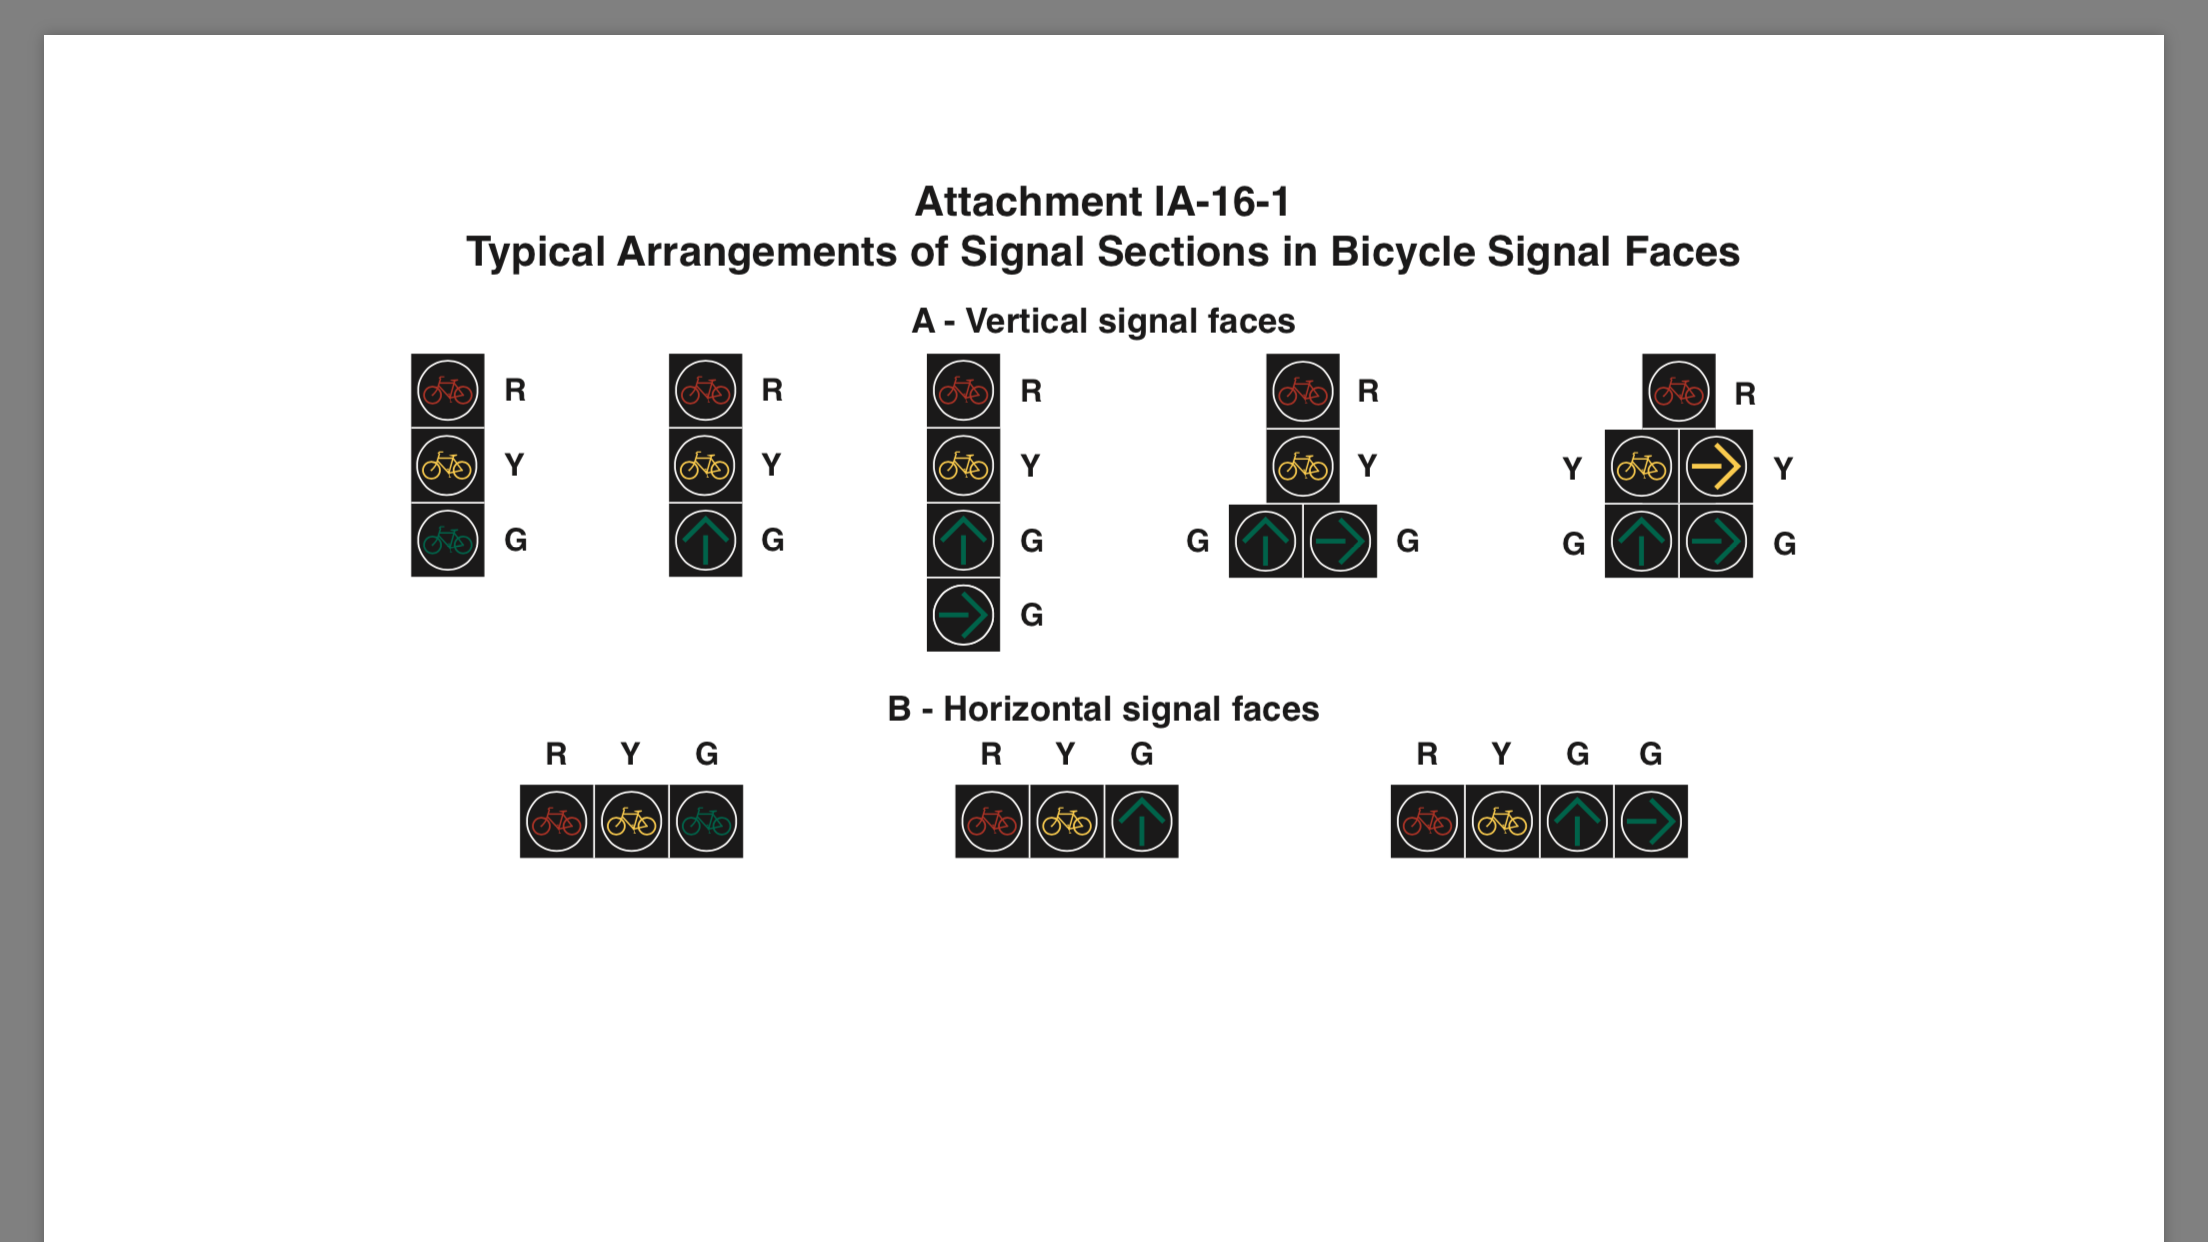 The Chestnut Street Bridge will get some form of bicycle traffic signal